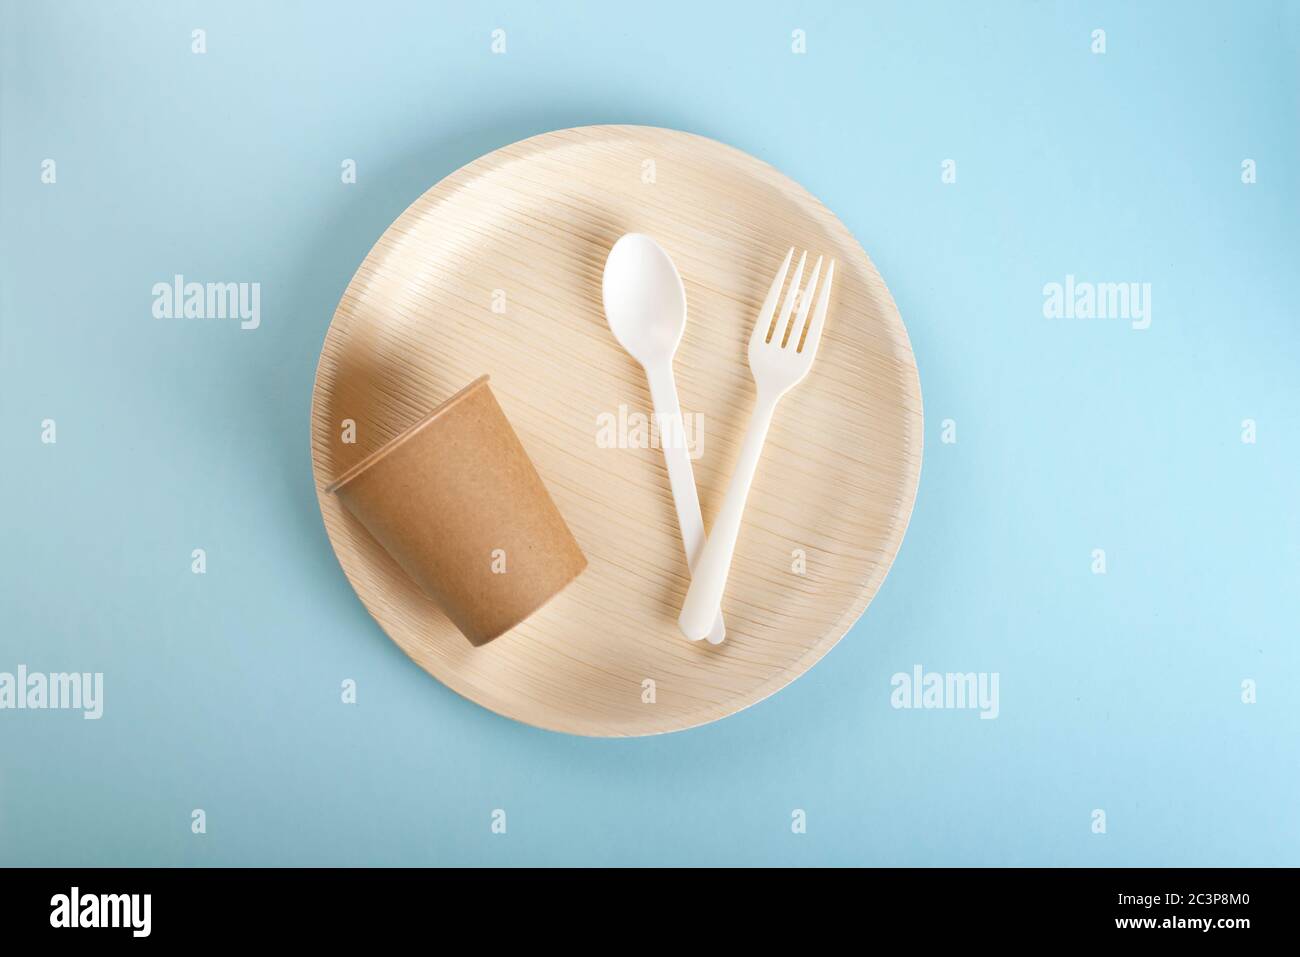 A set of disposable plate, disposable cup, fork and spoon on light blue background Stock Photo